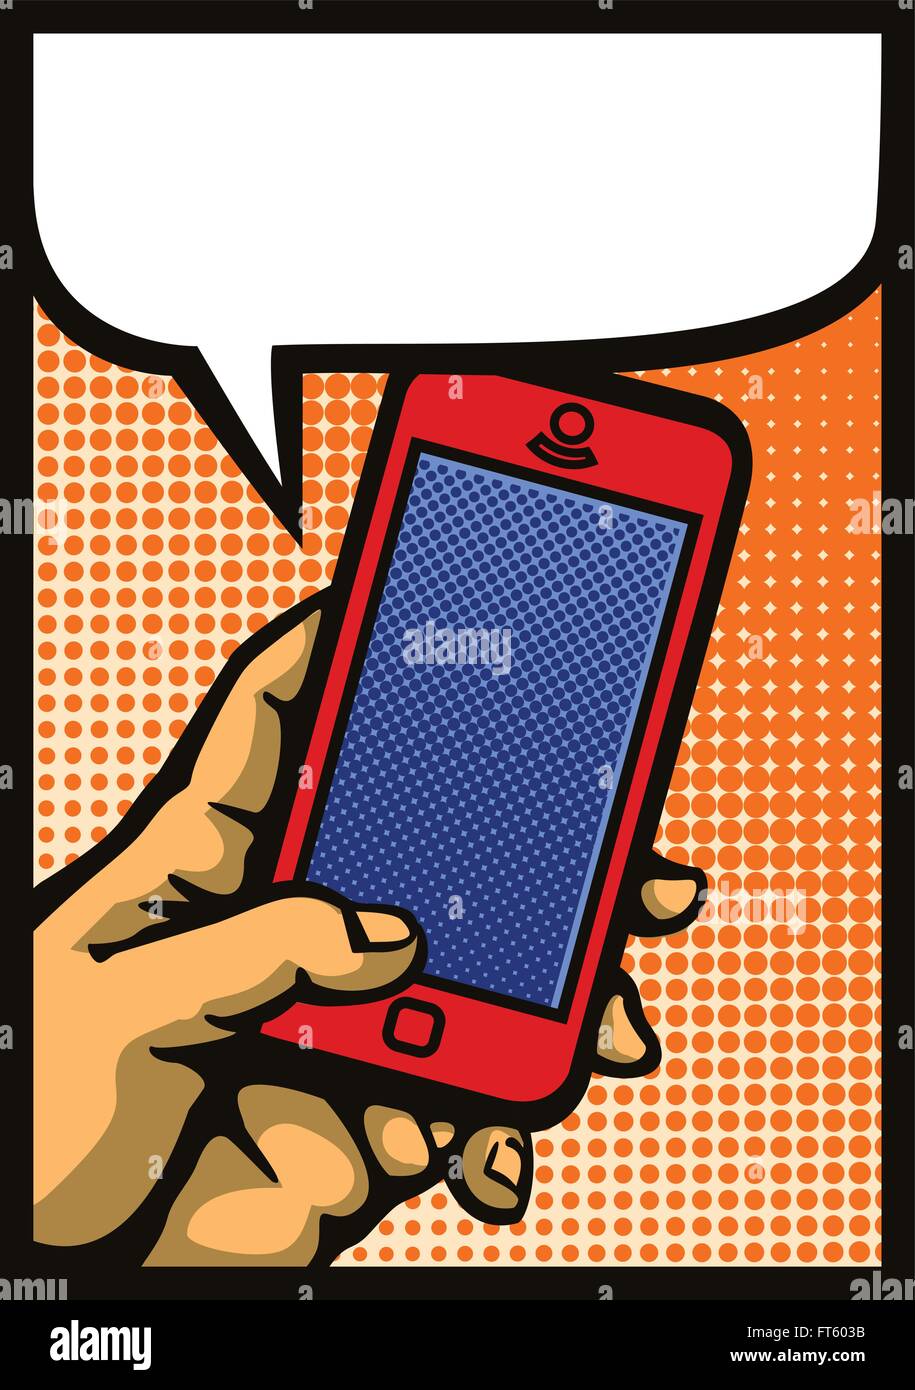 Pop art style hand holding smartphone, comic book mobile phone vector illustration Stock Vector